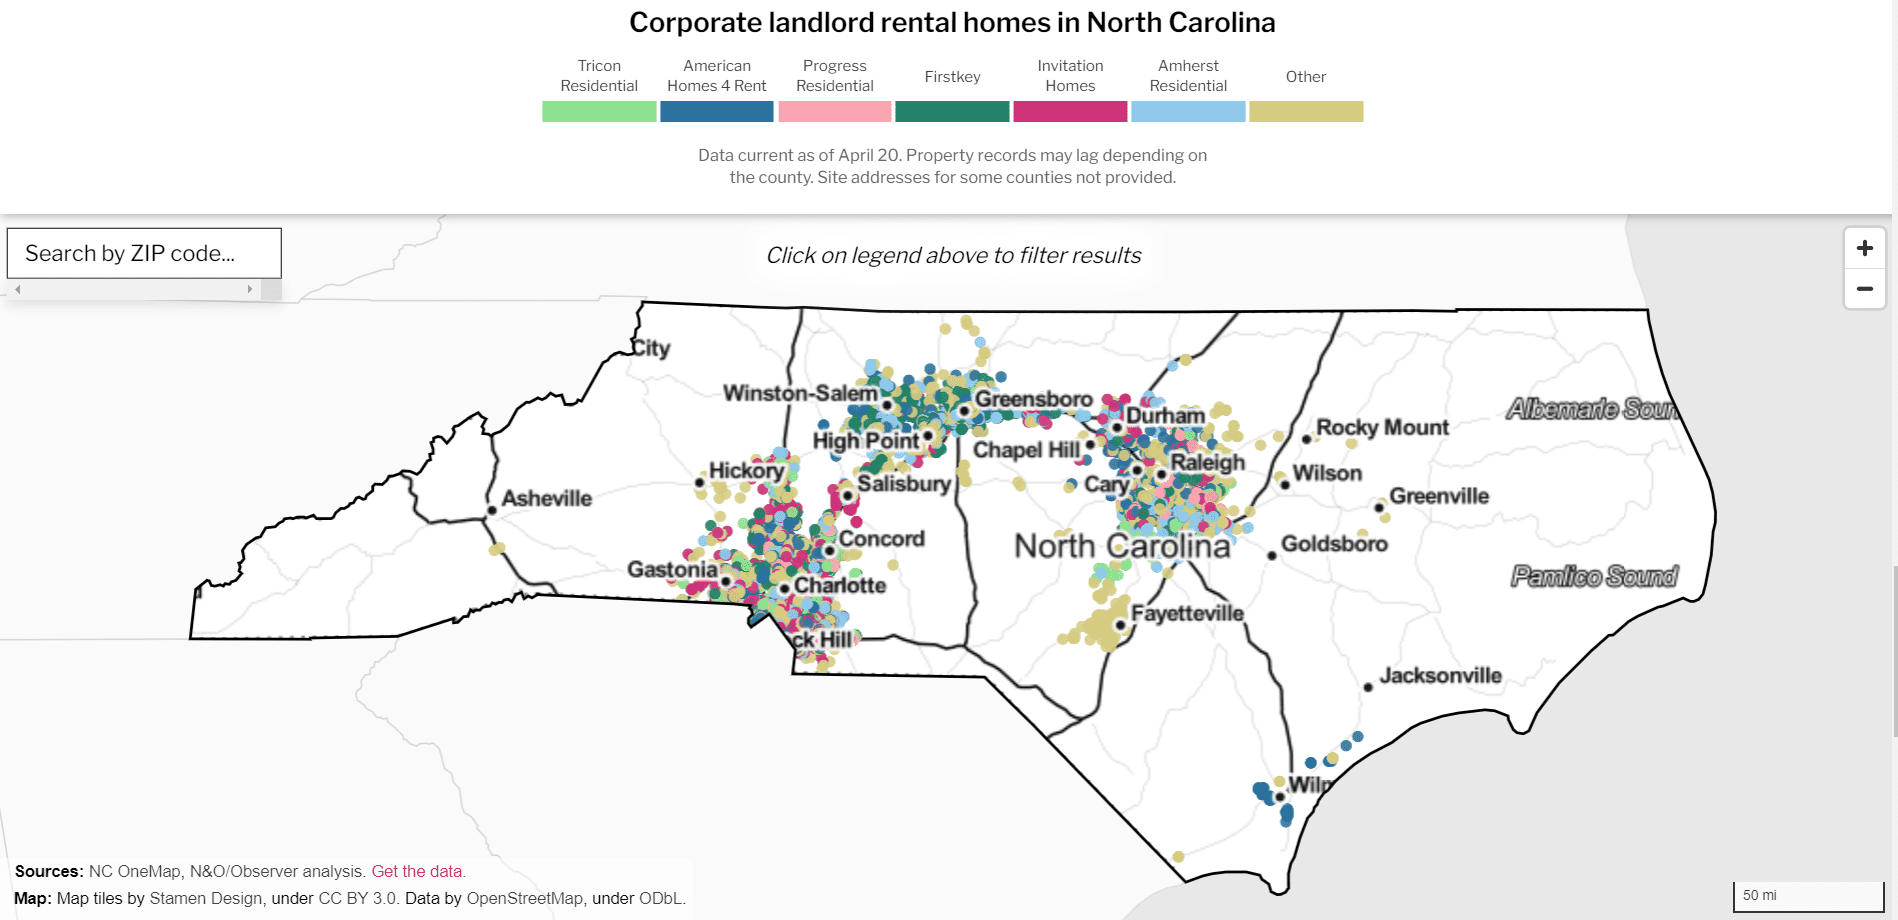 A map of corporate landlords in North Carolina